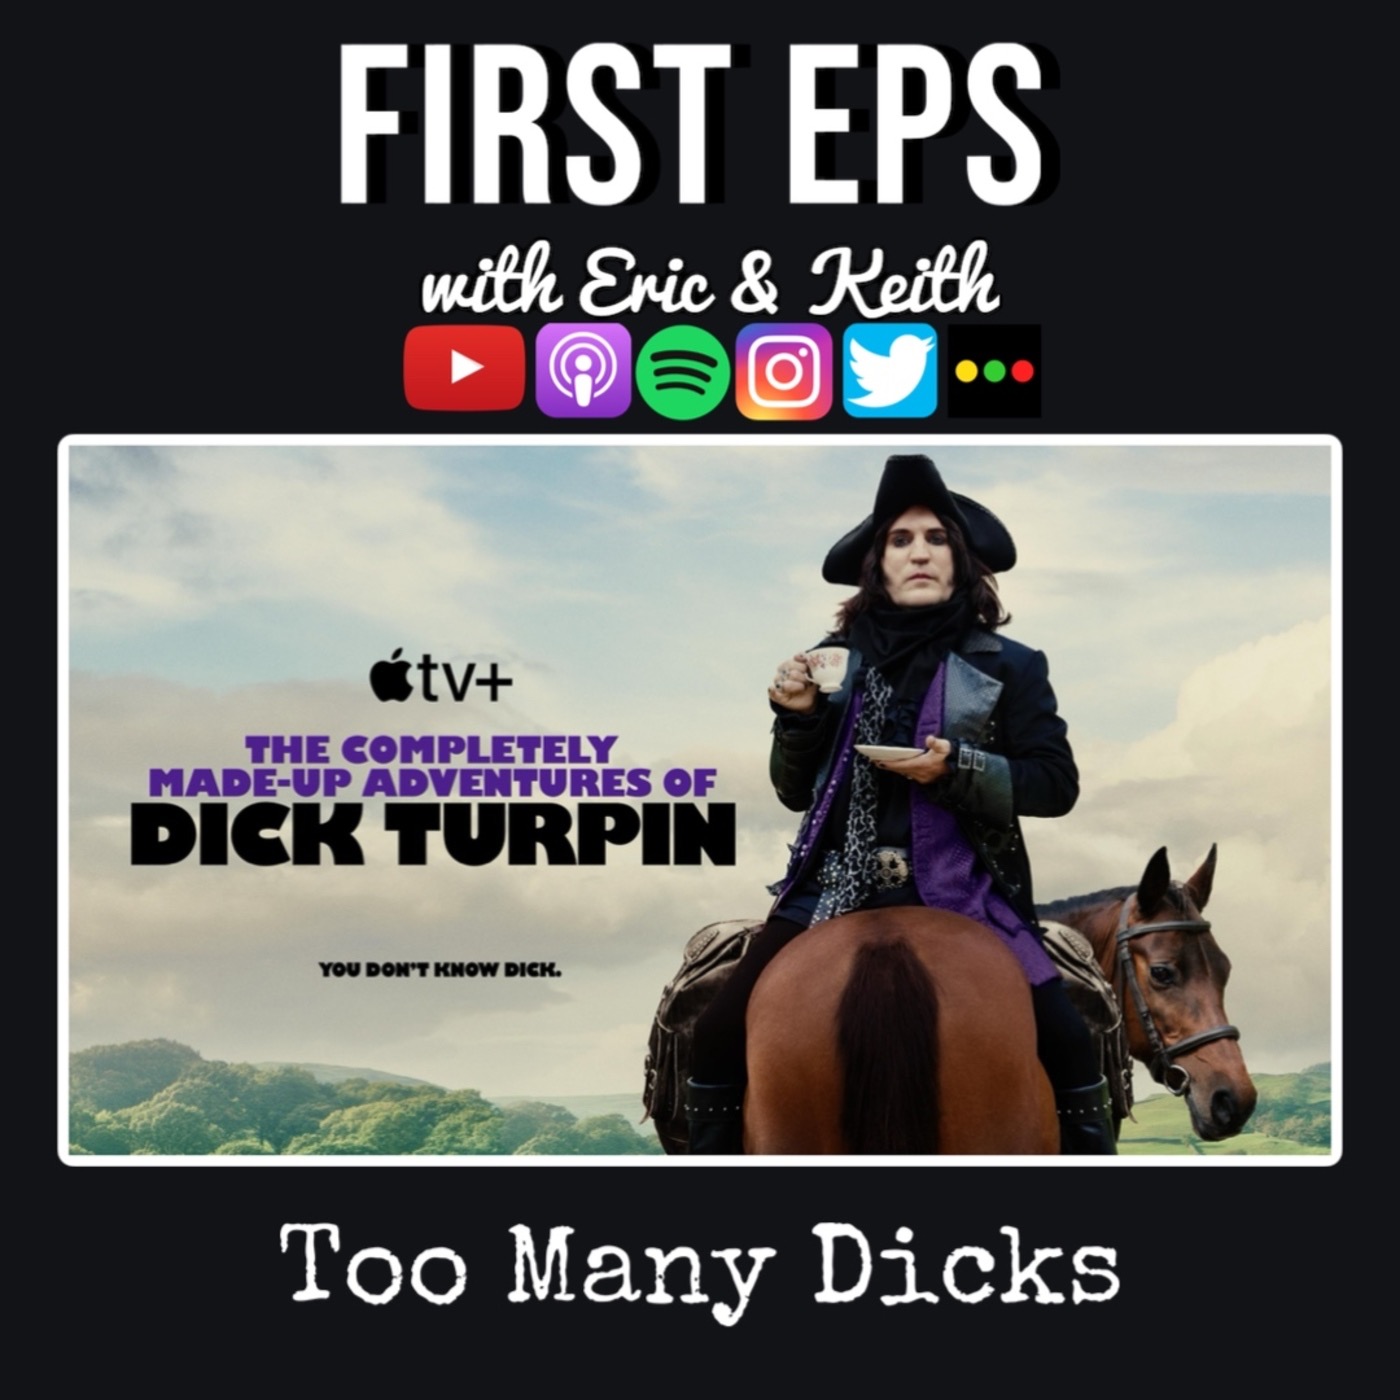 The Completely Made Up Adventures of Dick Turpin: Too Many Dicks